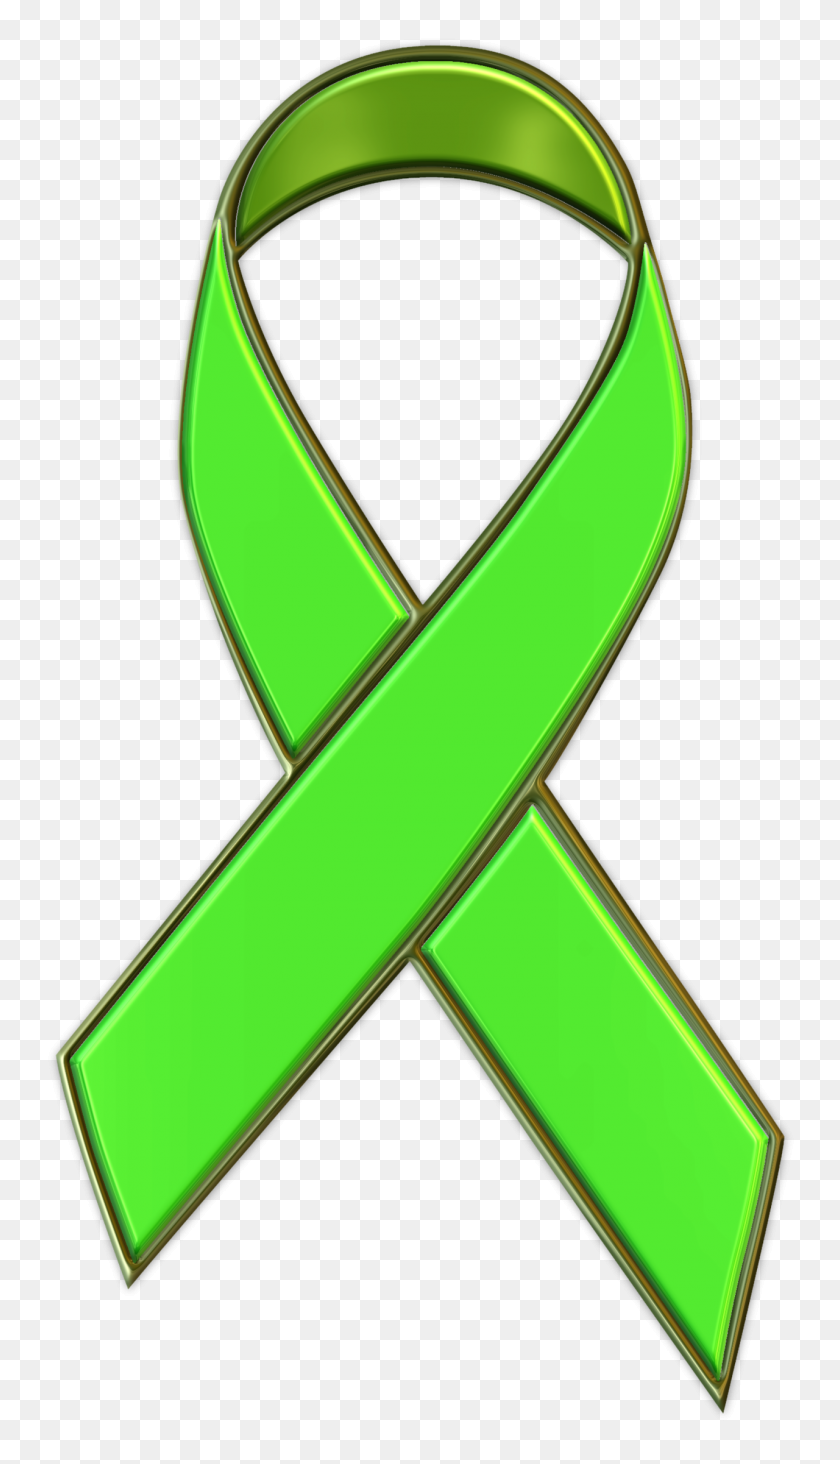 1280x2304 Picture Of Lime Green Ribbon To Support Mental Health Awareness - Green Ribbon PNG